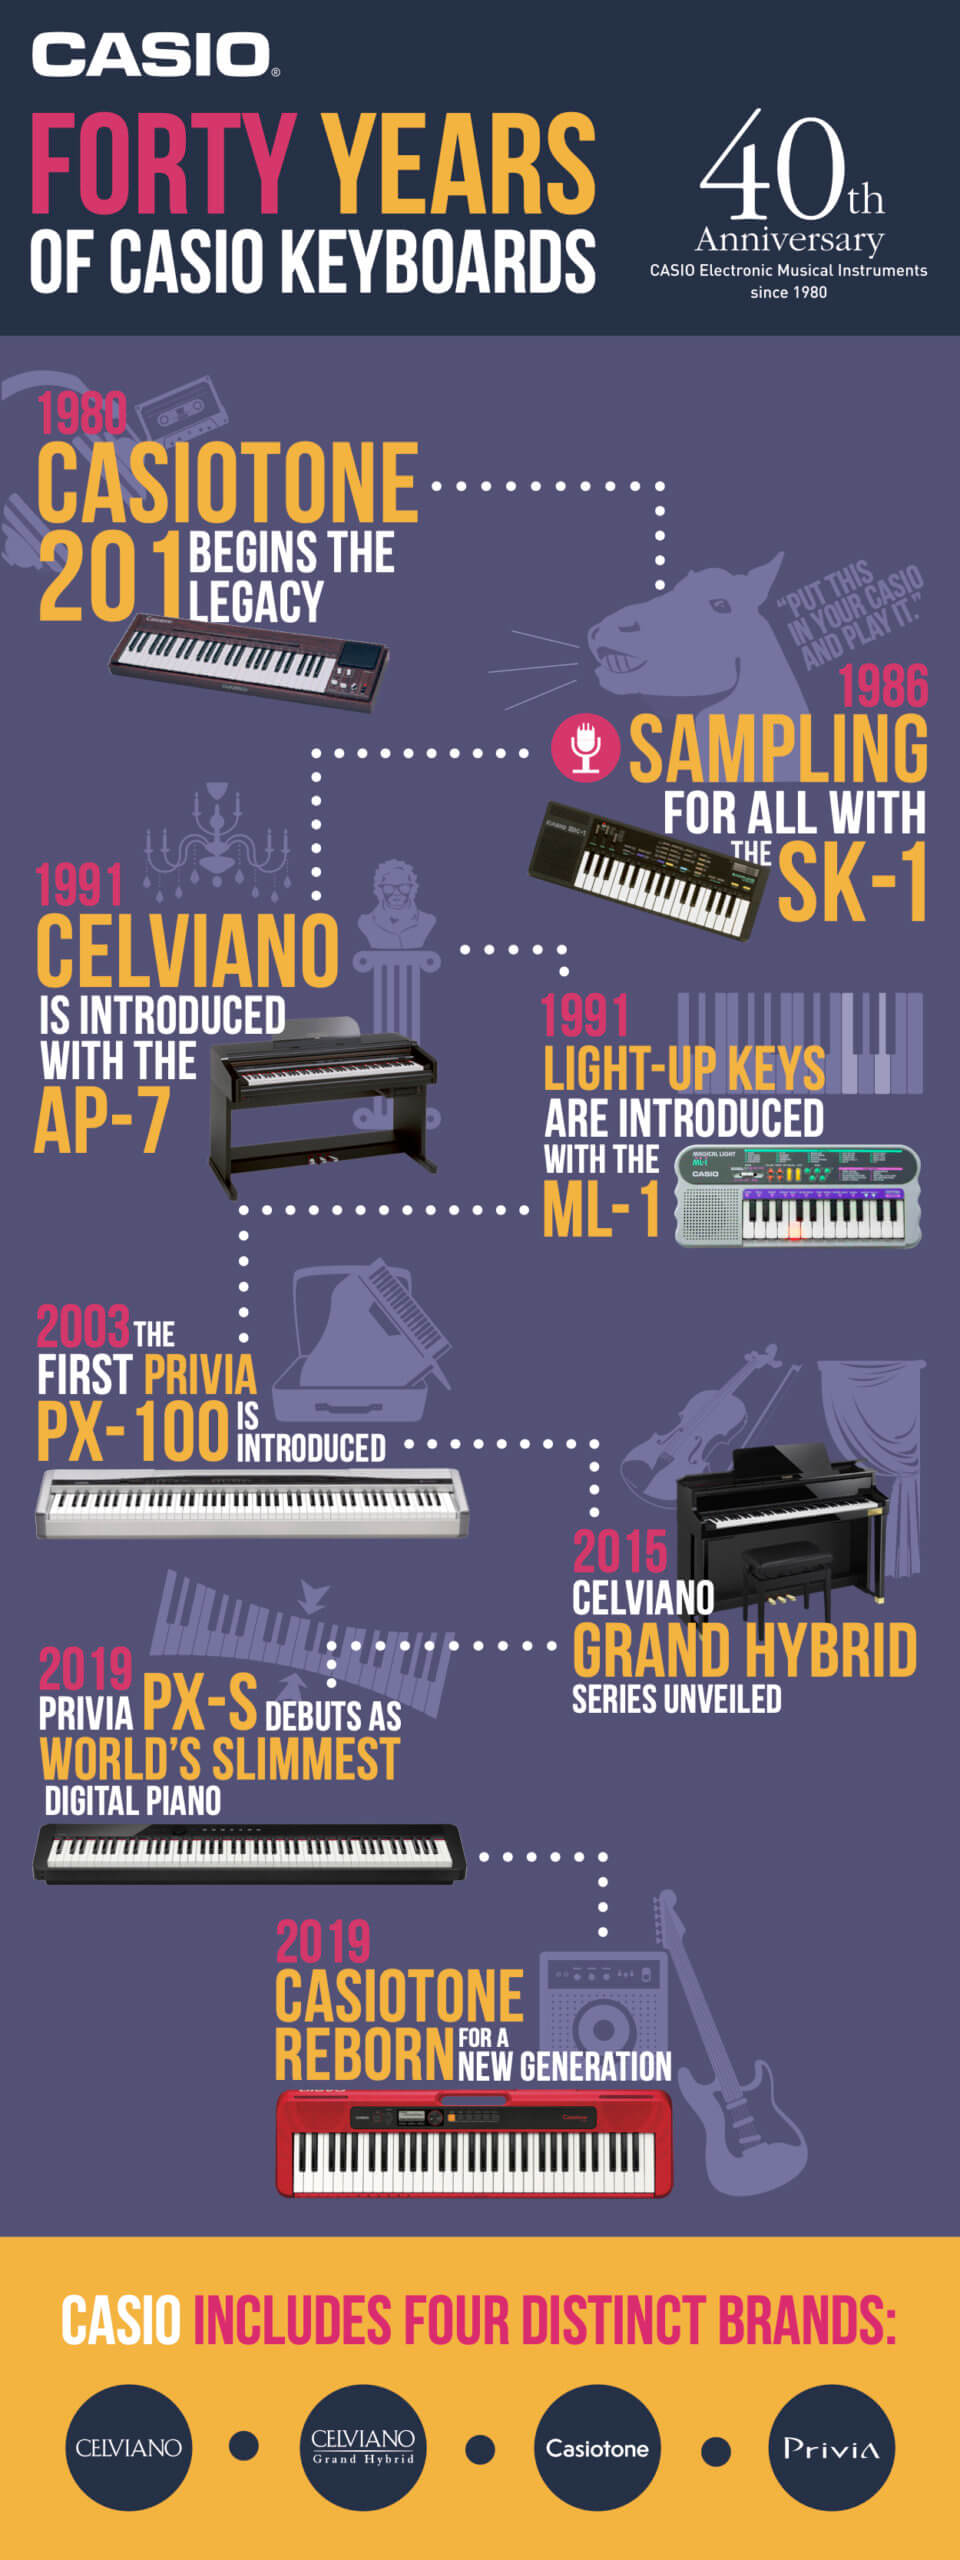 Congrats to Casio on 40 Years of Keyboards